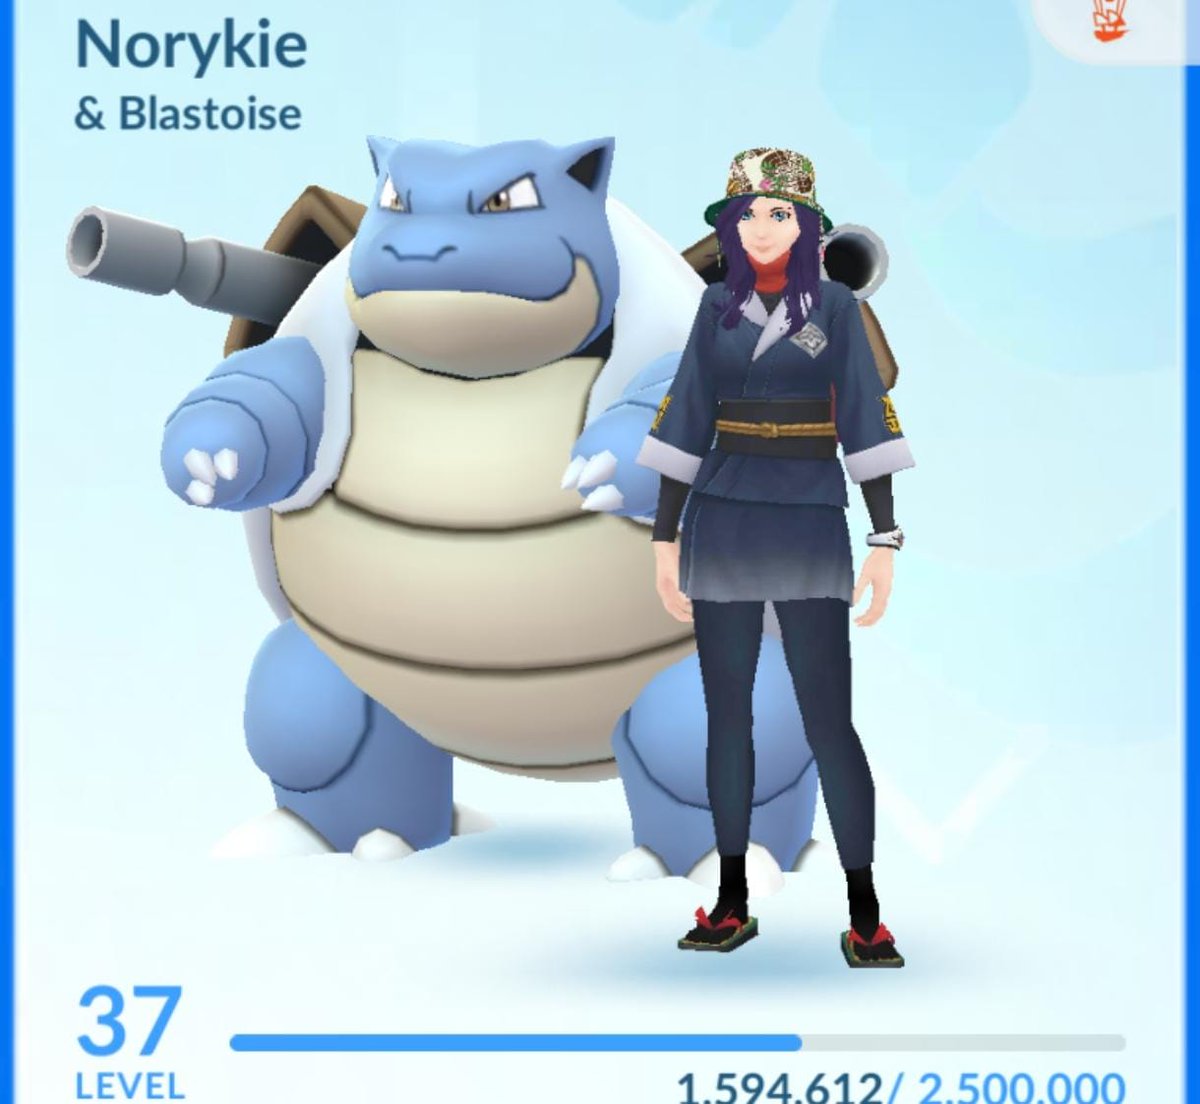 Let's be friends in Pokémon GO! My Trainer Code is 522093769193! Will send gift and let's raid together #pokemon #pokemongo #pokemonfriend #pokemongofriend